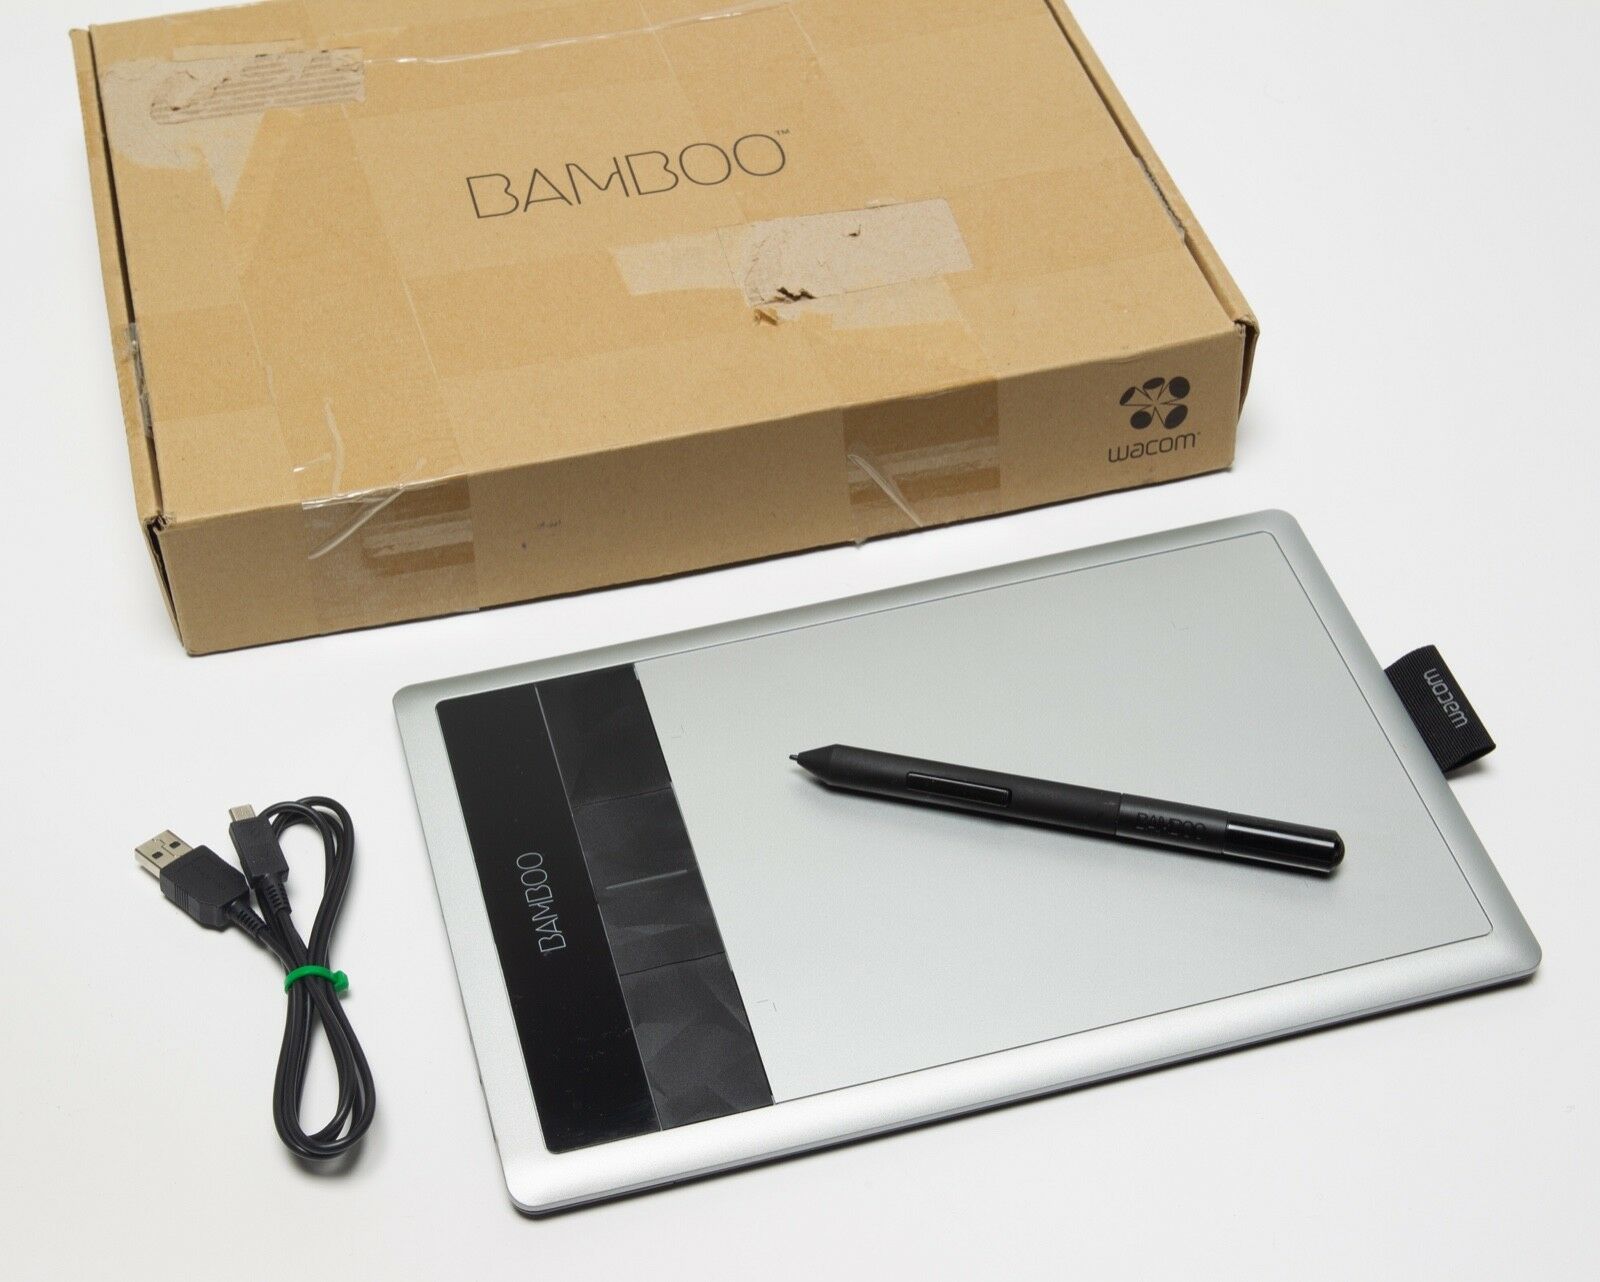 WACOM BAMBOO Model CTH-470/S Artist Drawing Sketching Tablet w/ Pen